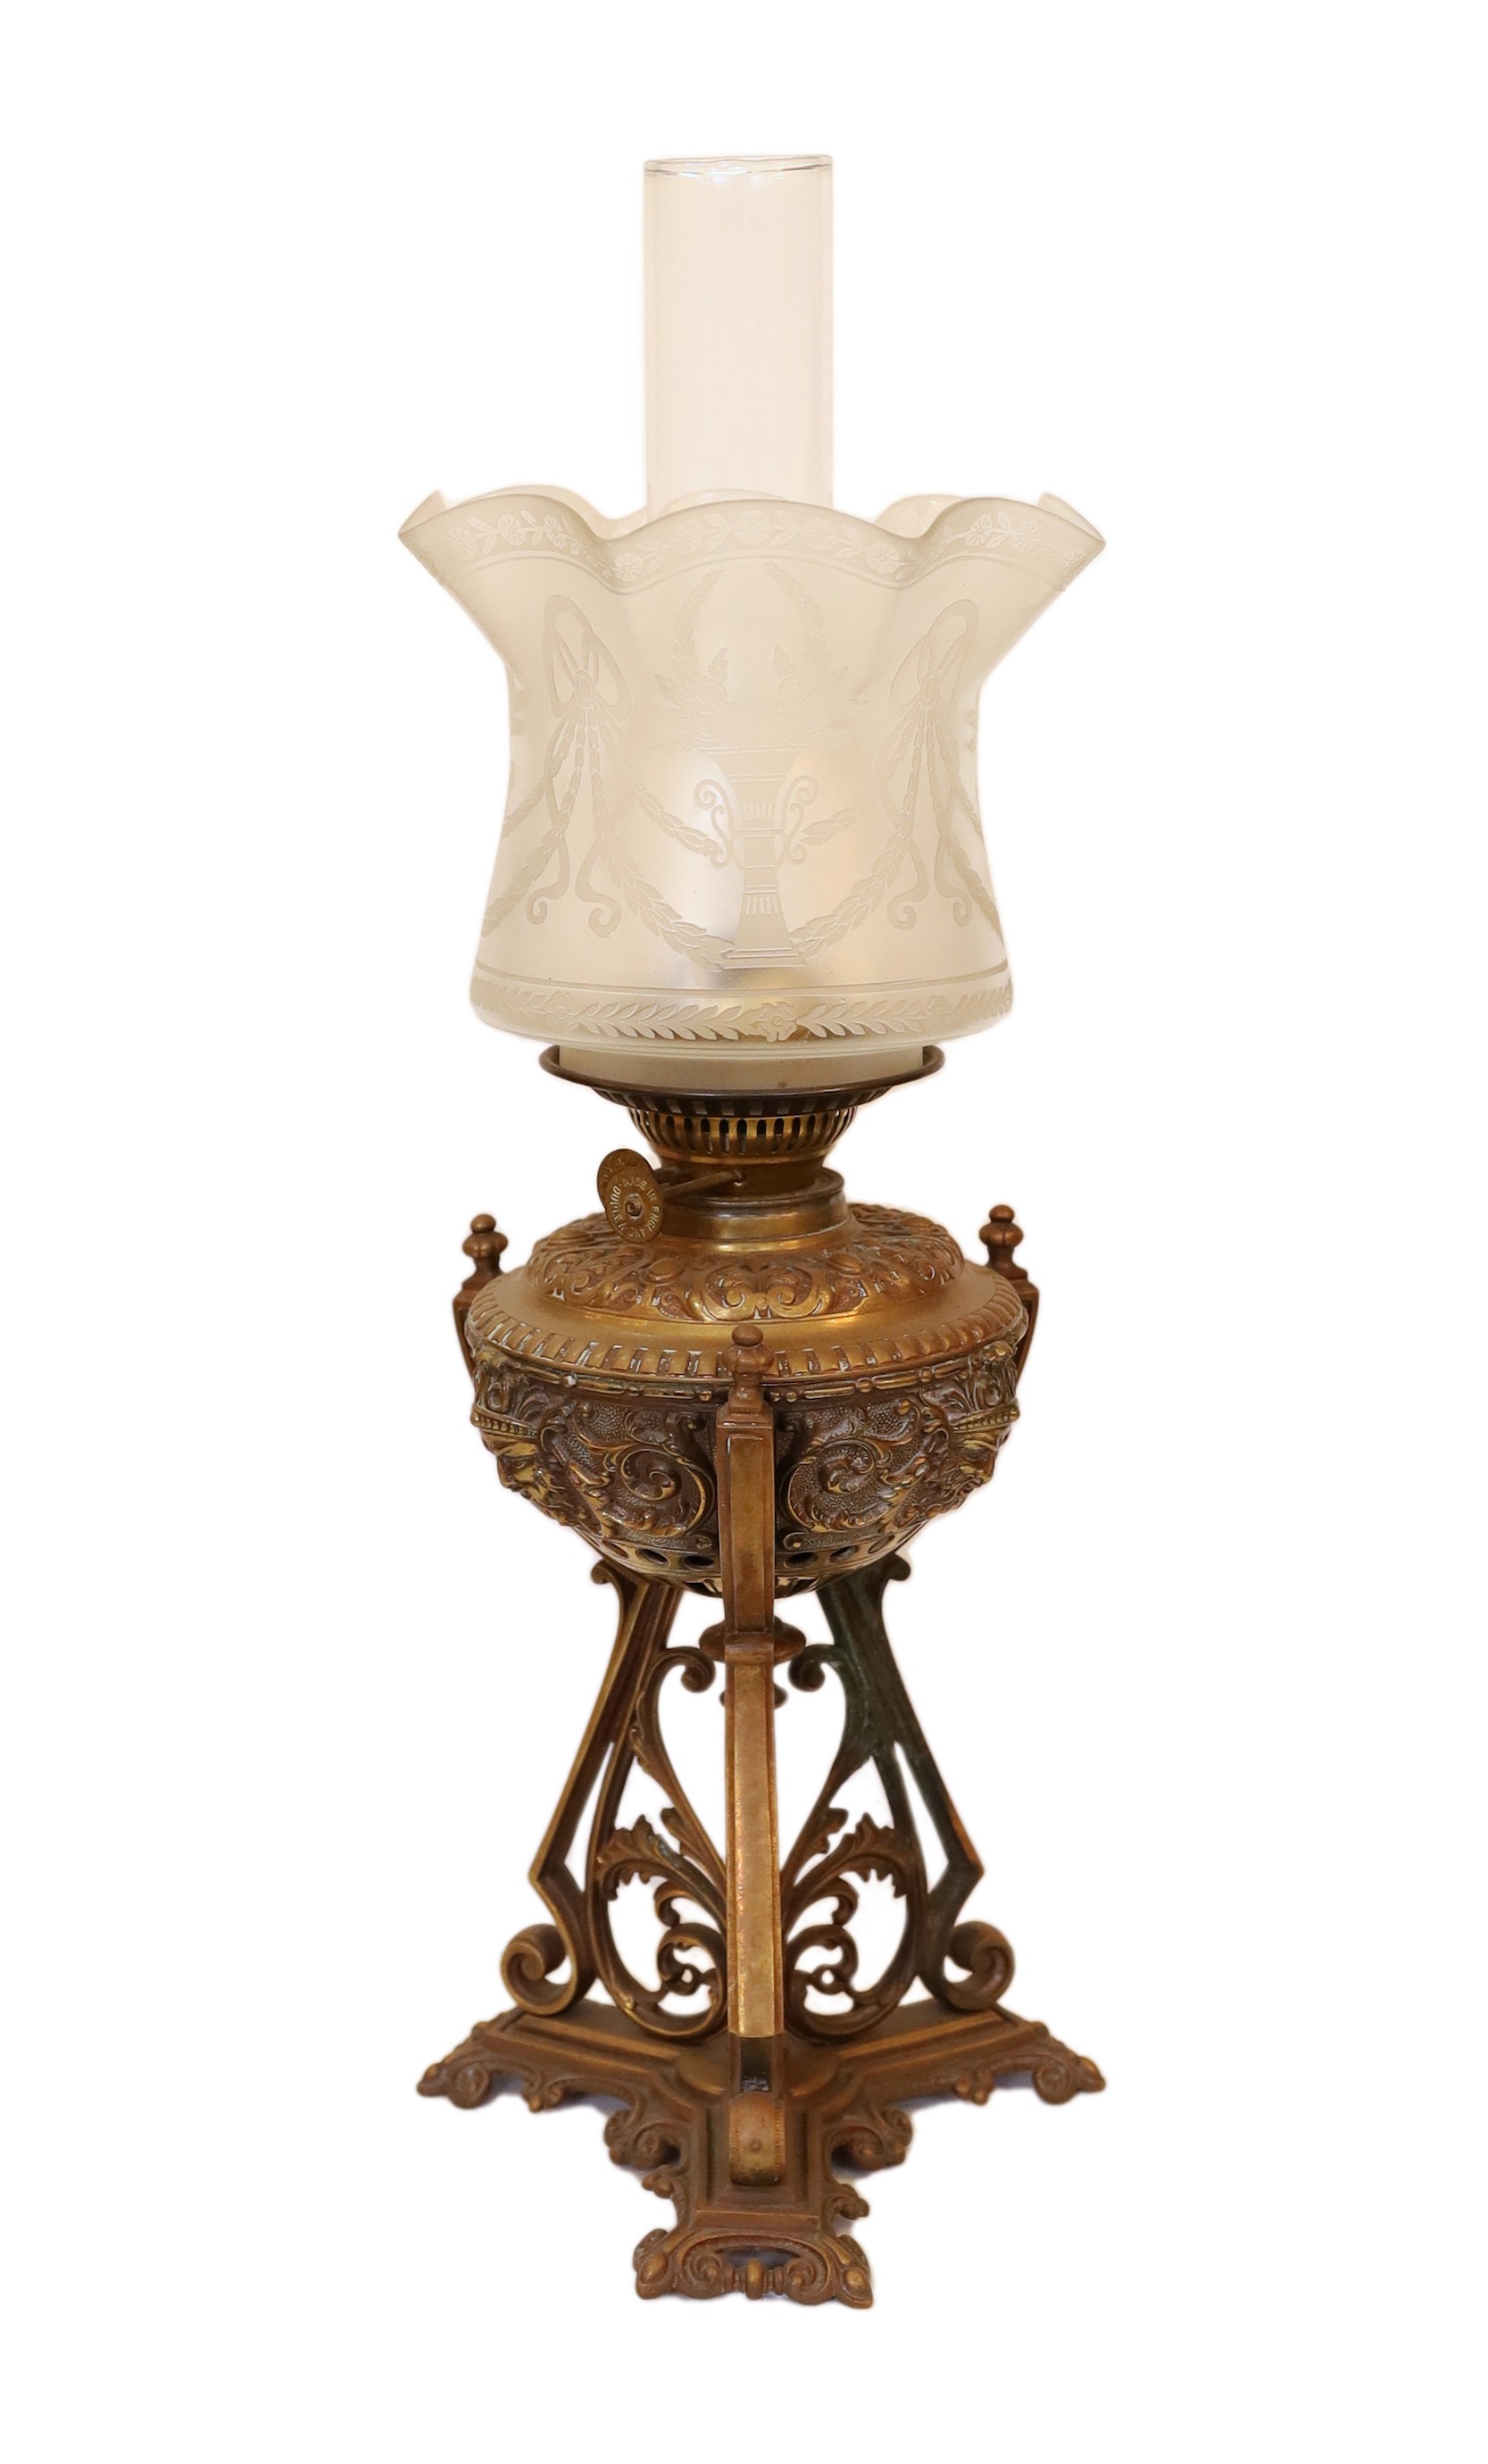 A Victorian bronze Renaissance revival oil lamp, decorated with masks and scrolls, with duplex mechanism, frosted glass shade and flue, height overall 58cm